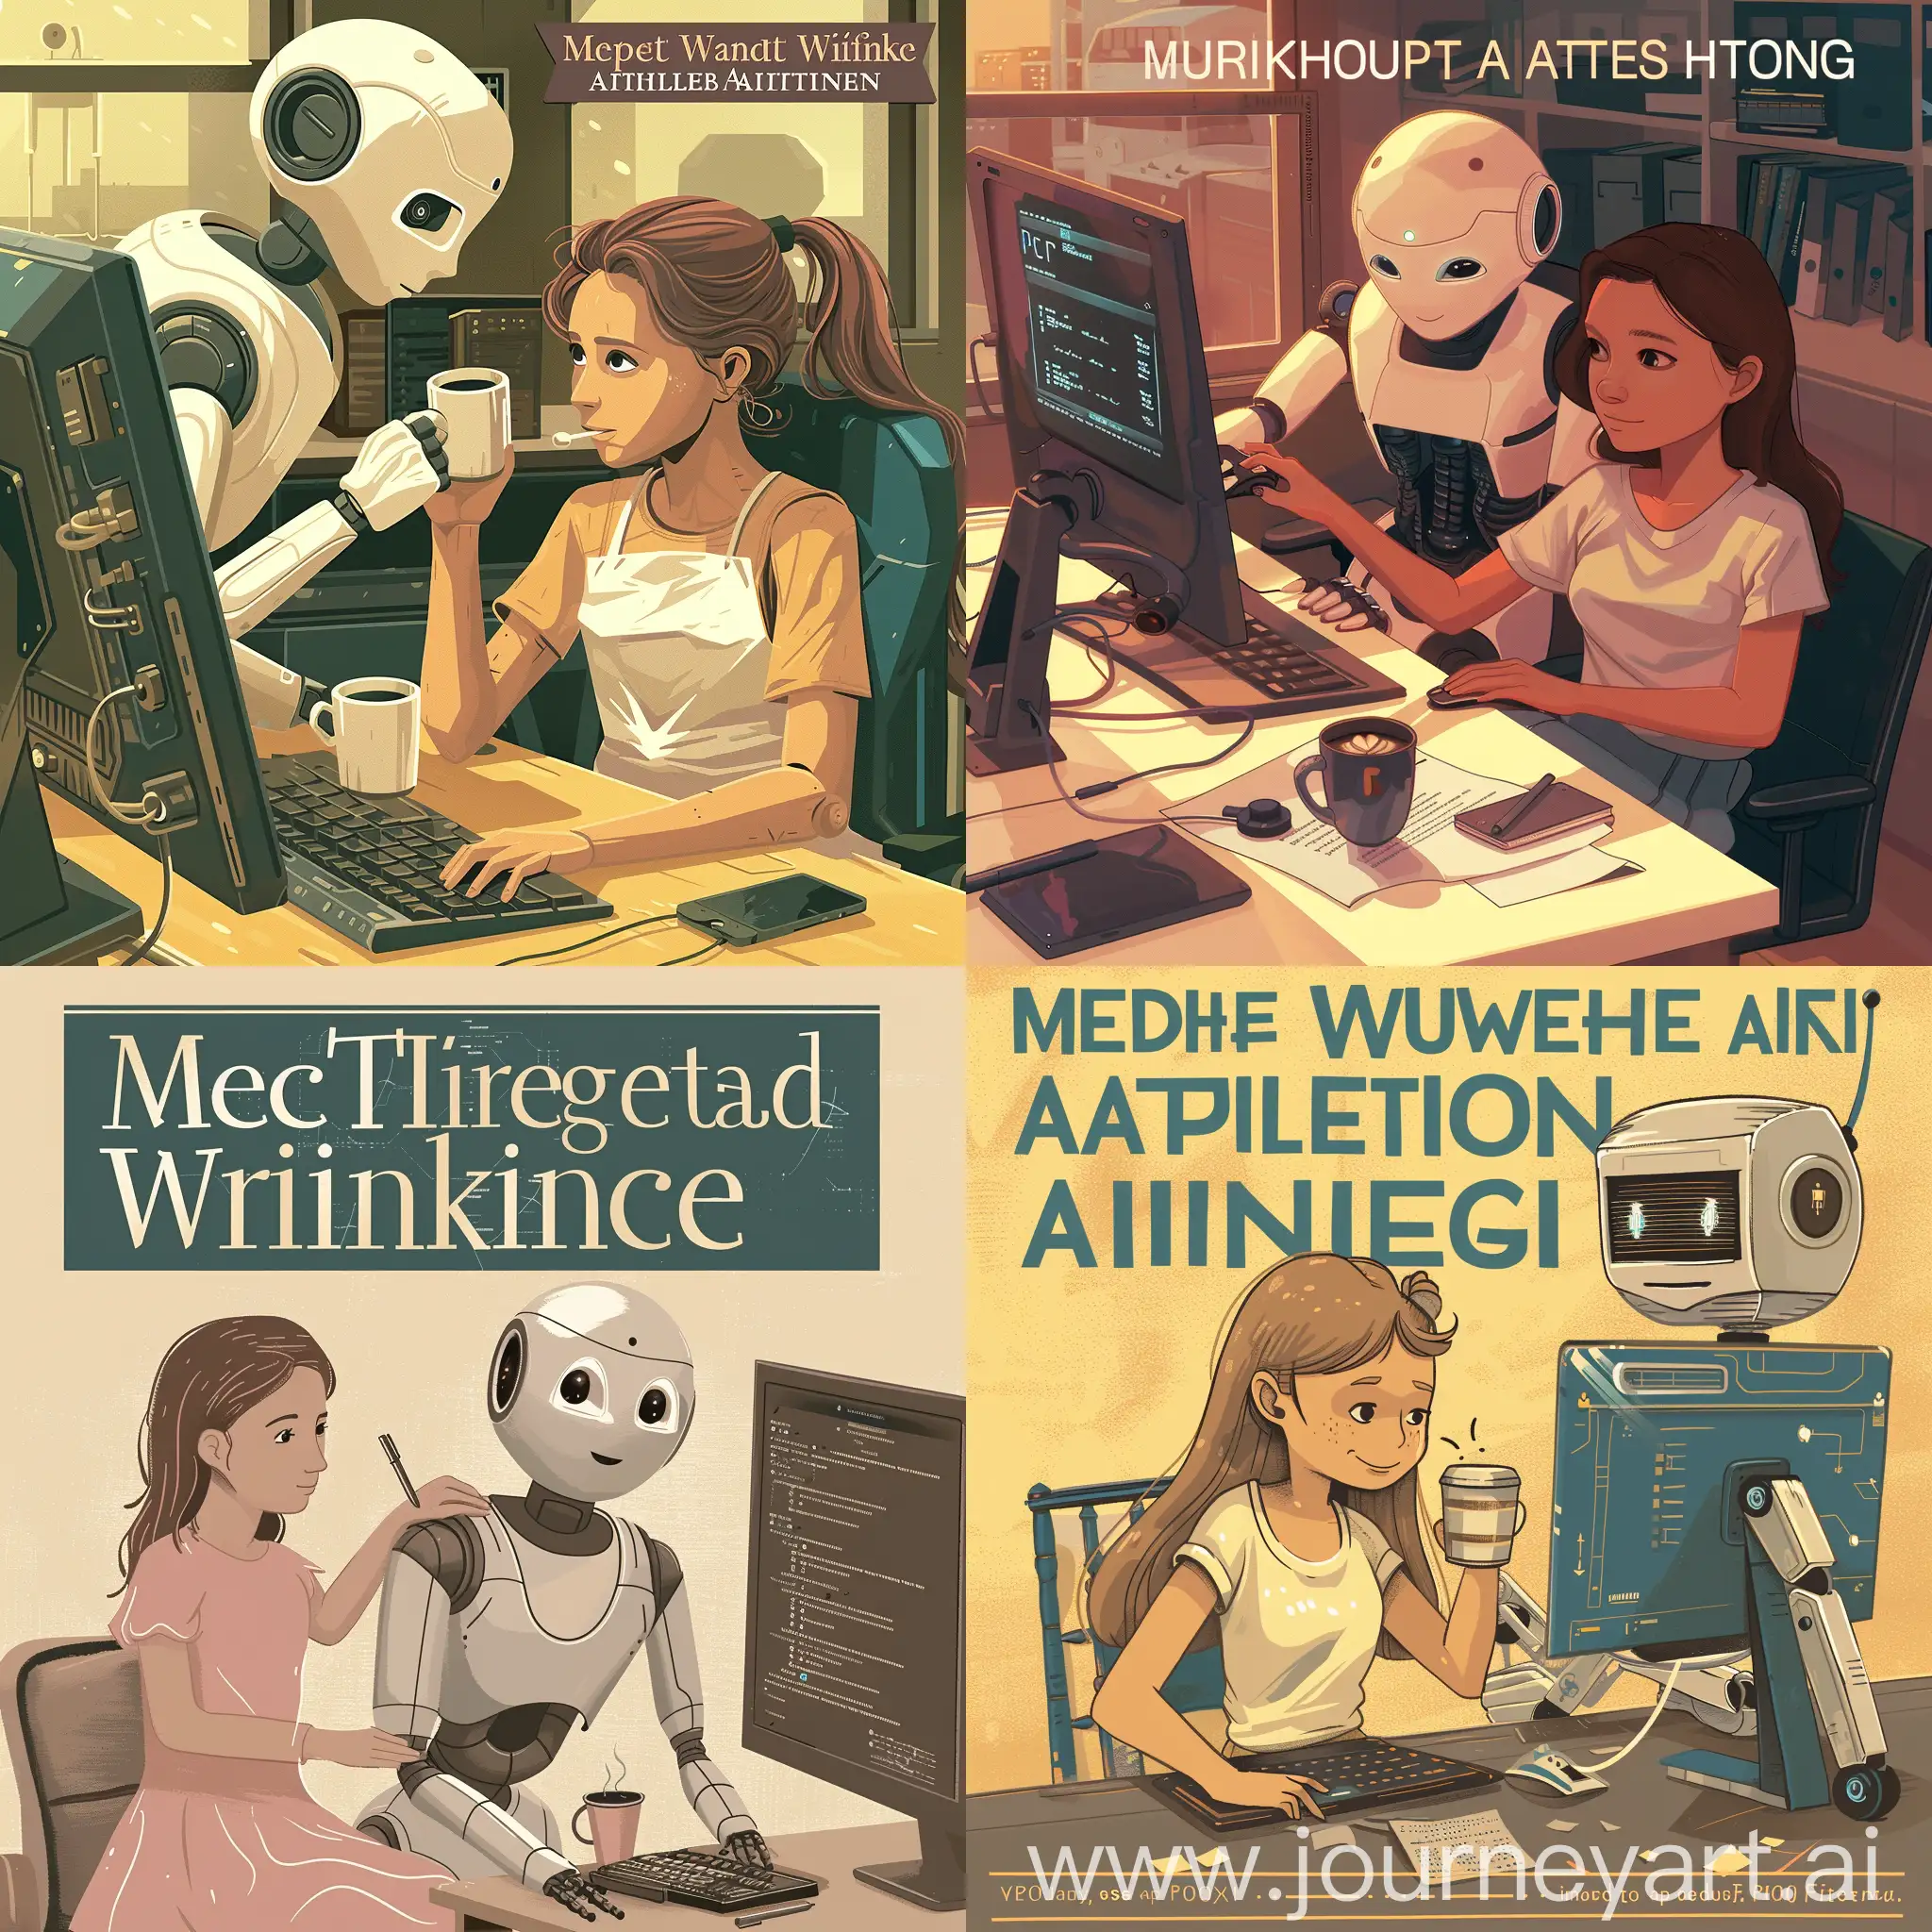 Collaborative-Medical-Writing-Girl-and-Robot-Coauthoring-with-Coffee